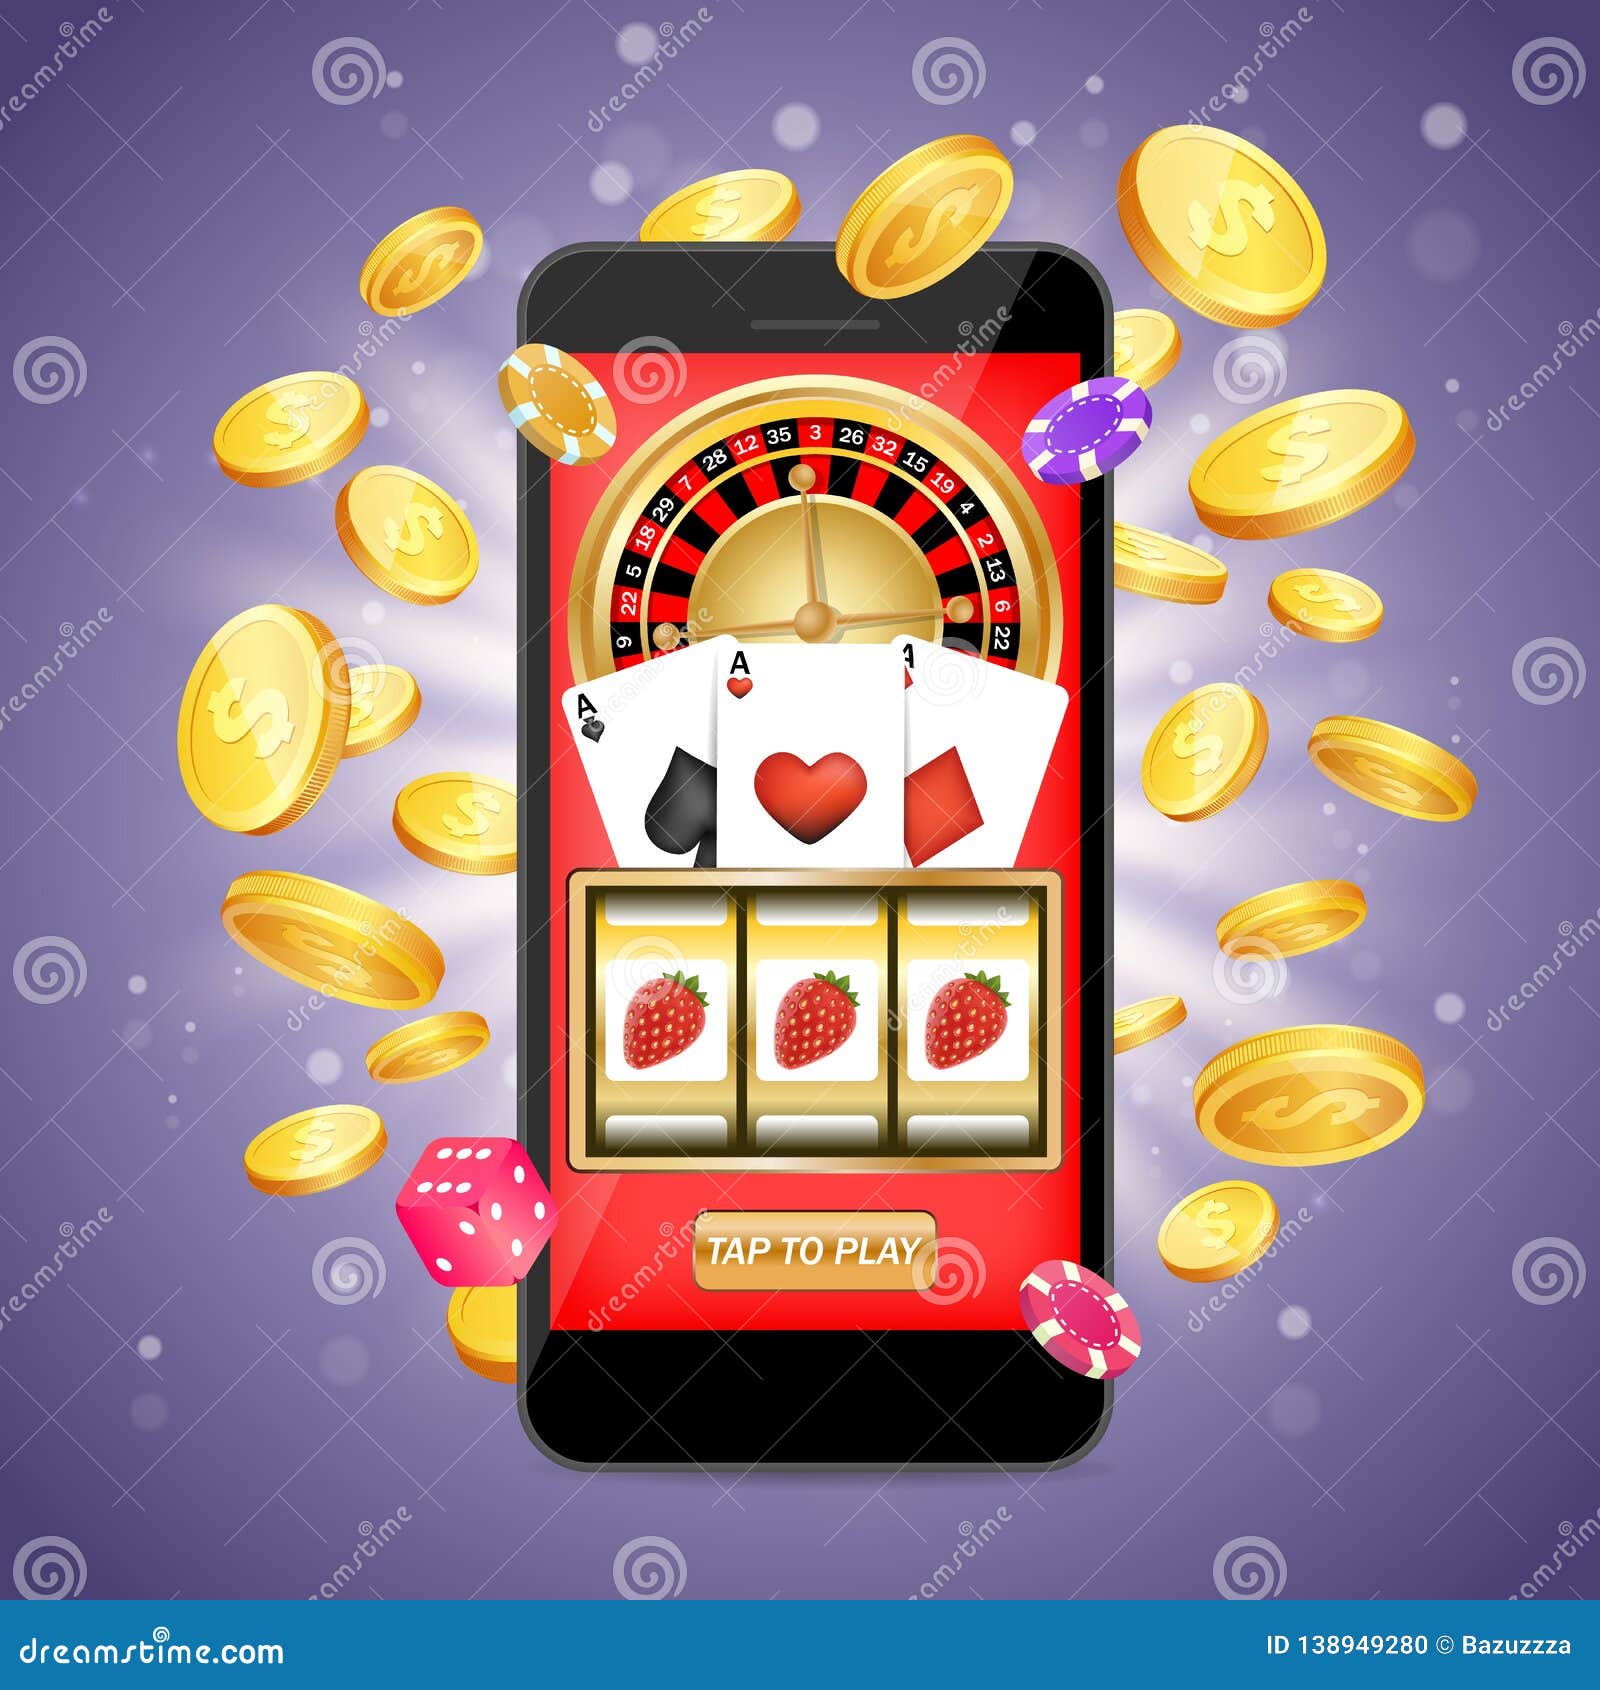 Apply Any Of These 10 Secret Techniques To Improve pokies mobile